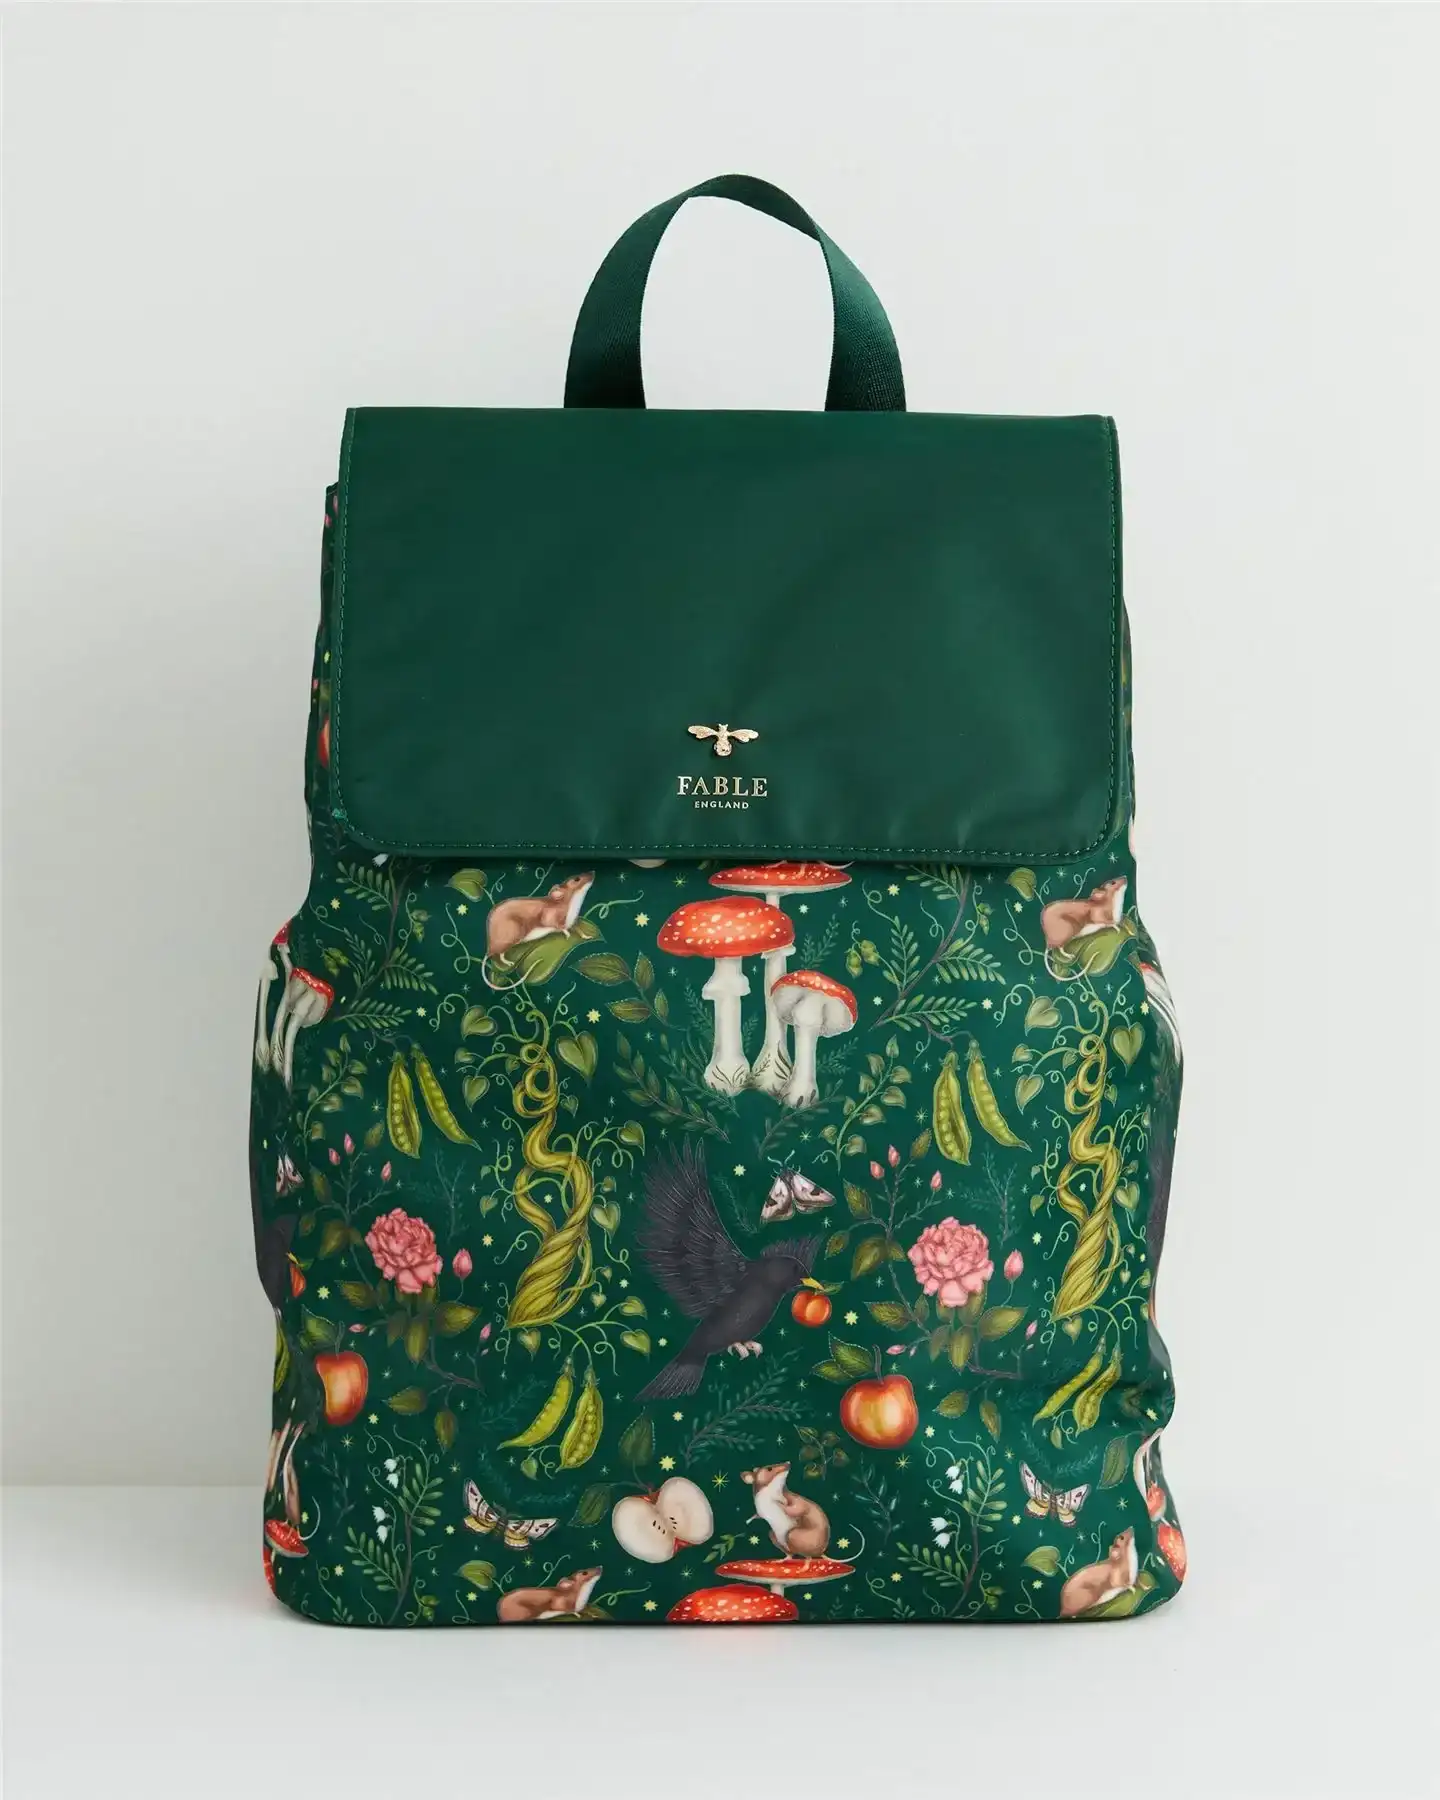 Image of Catherine Rowe x Fable Into the Woods Green Backpack